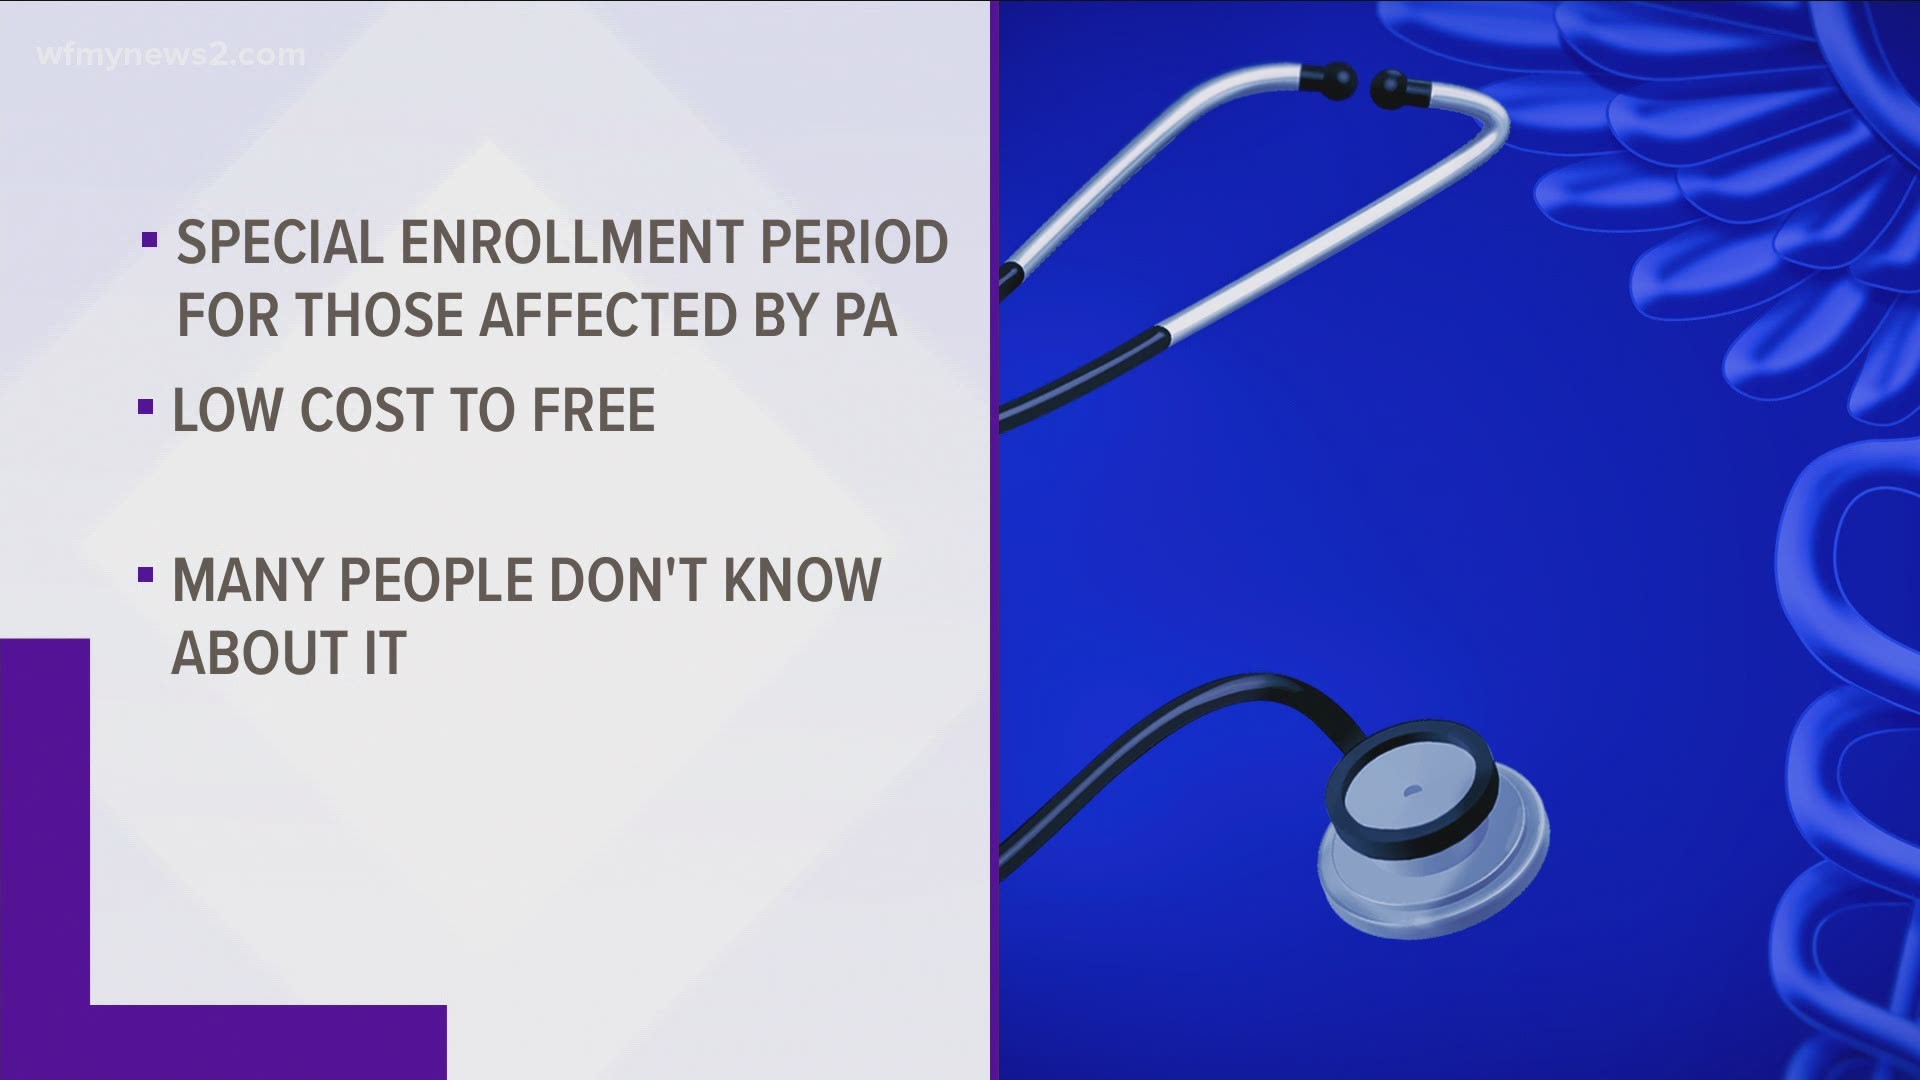 If you were laid off due to the pandemic, you may have low-cost or free healthcare plans available to you.